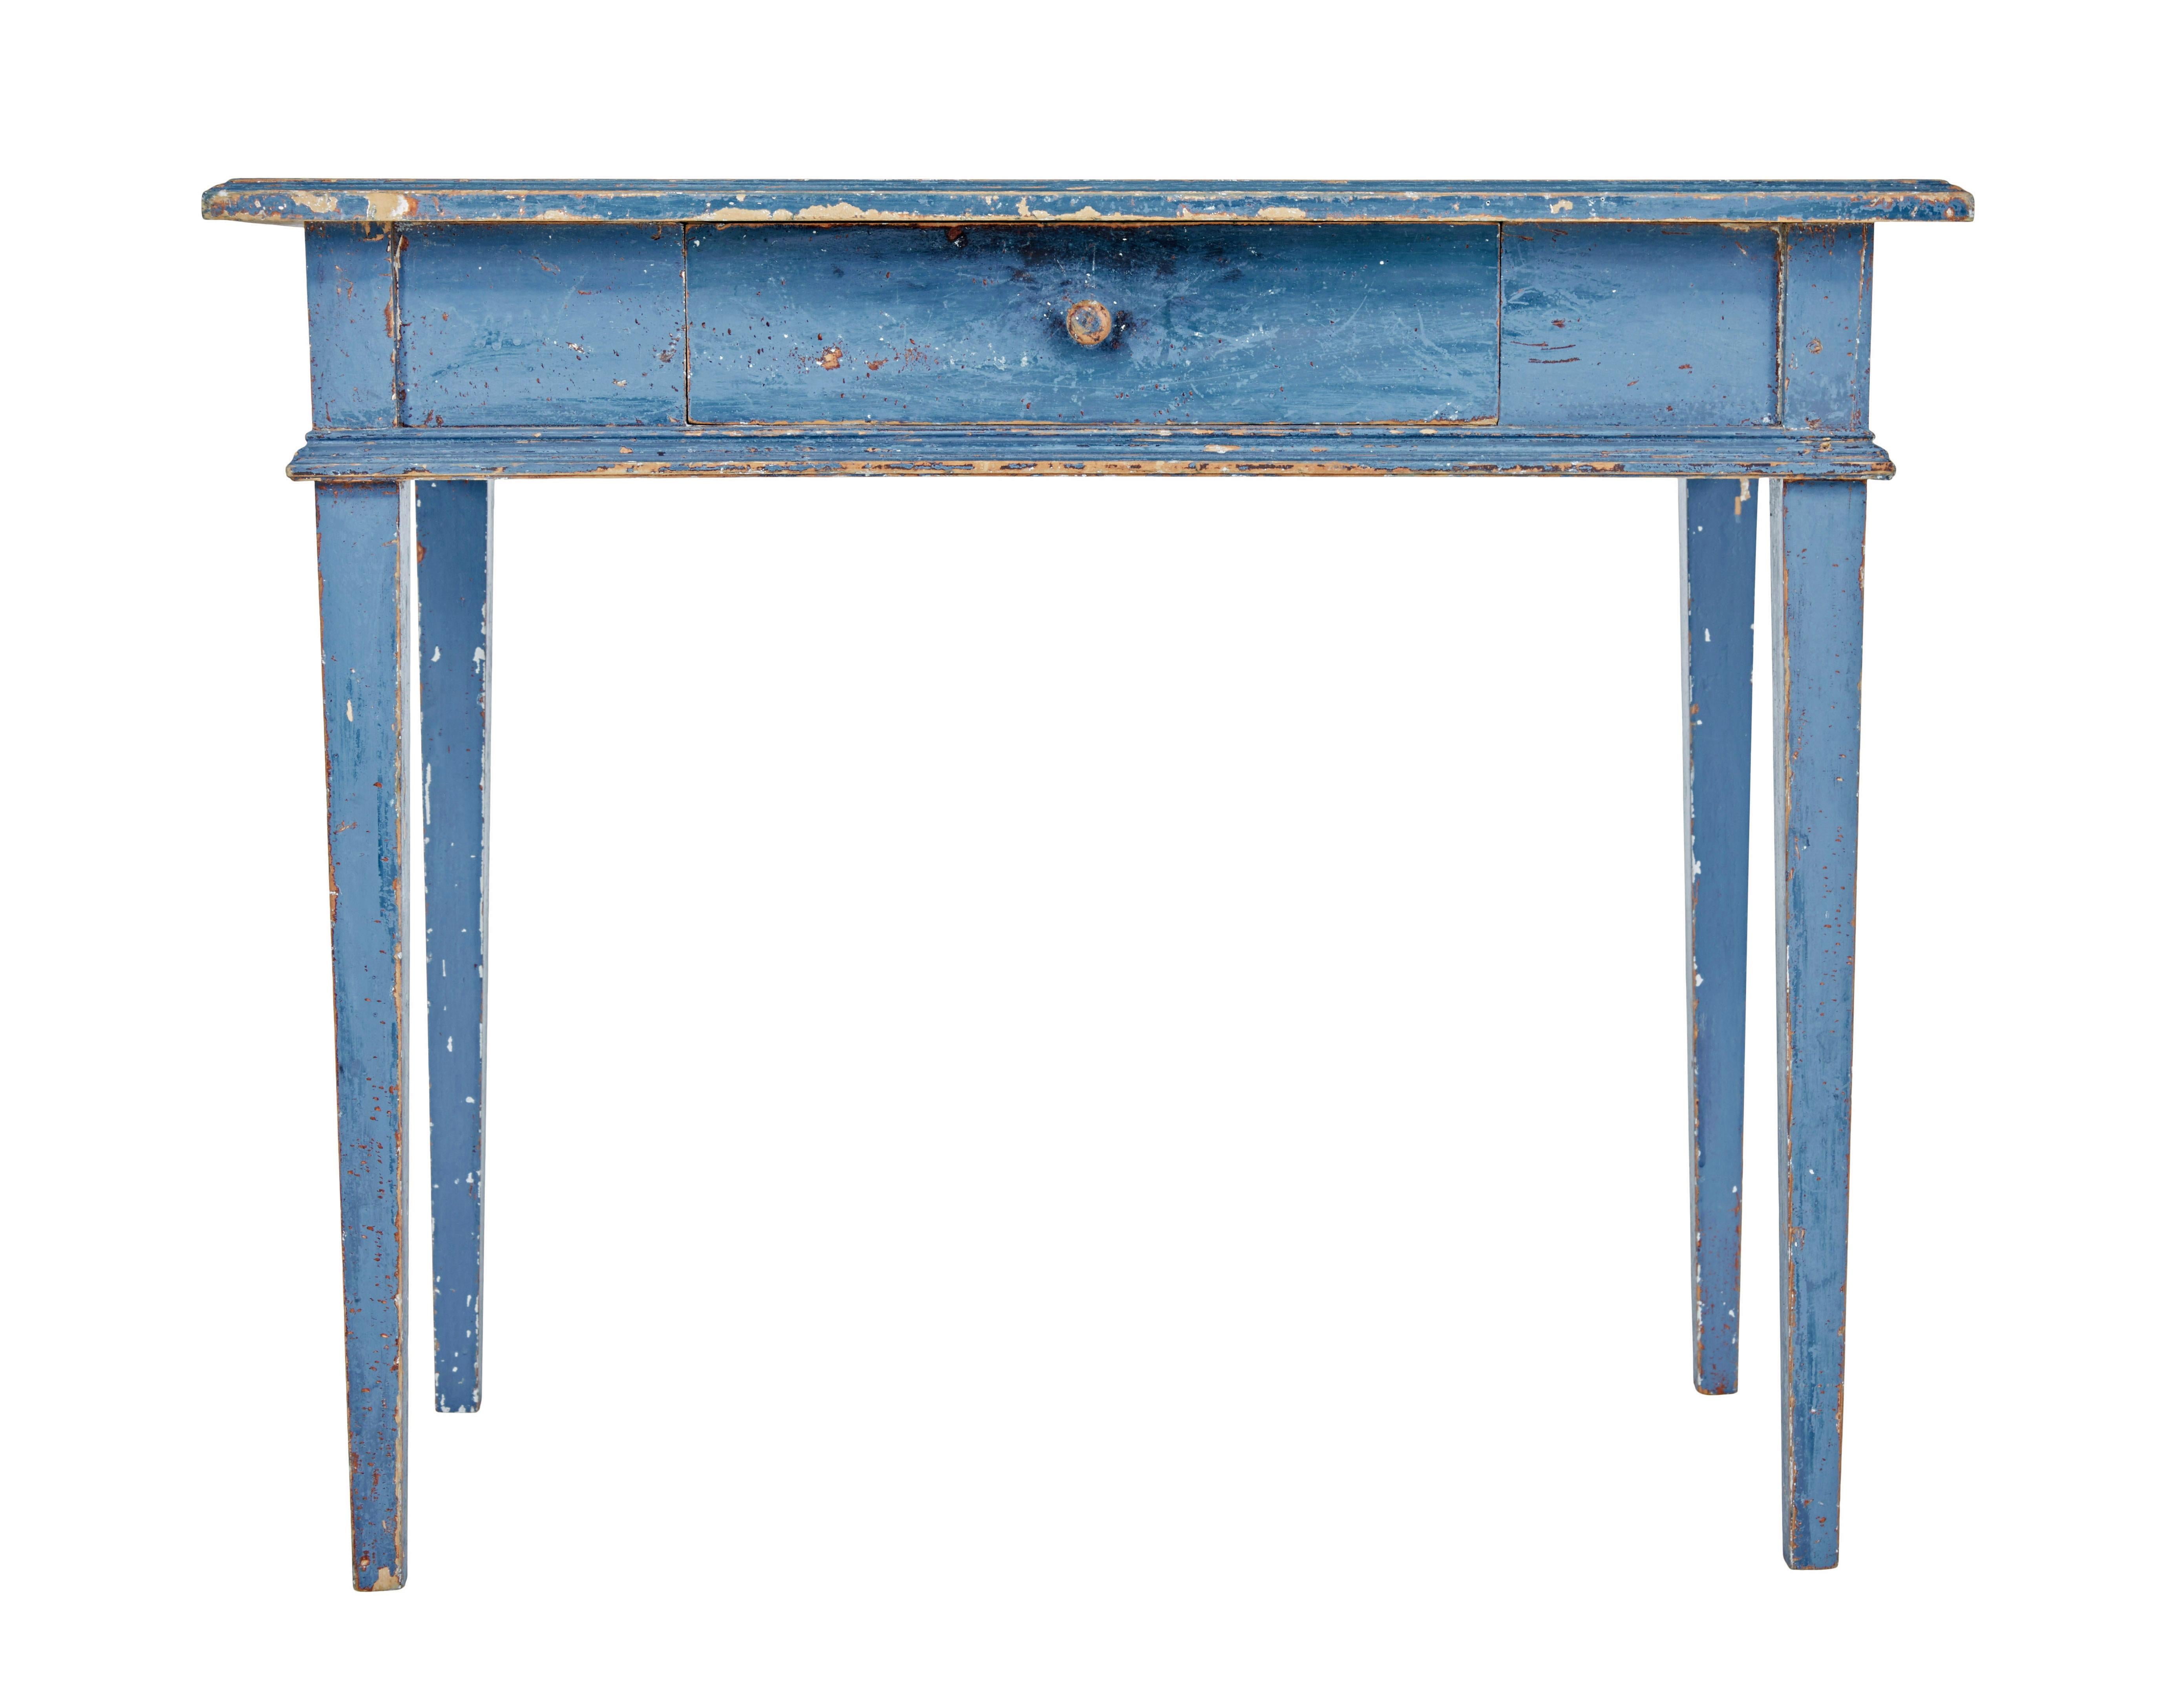 19th century hand painted swedish side table circa 1880.

Lovely traditional swedish side table in original striking blue paintwork.

Rectangular slightly over-sailing top with bull nosed ends.  Single drawer underneath. Standing on 4 tapering